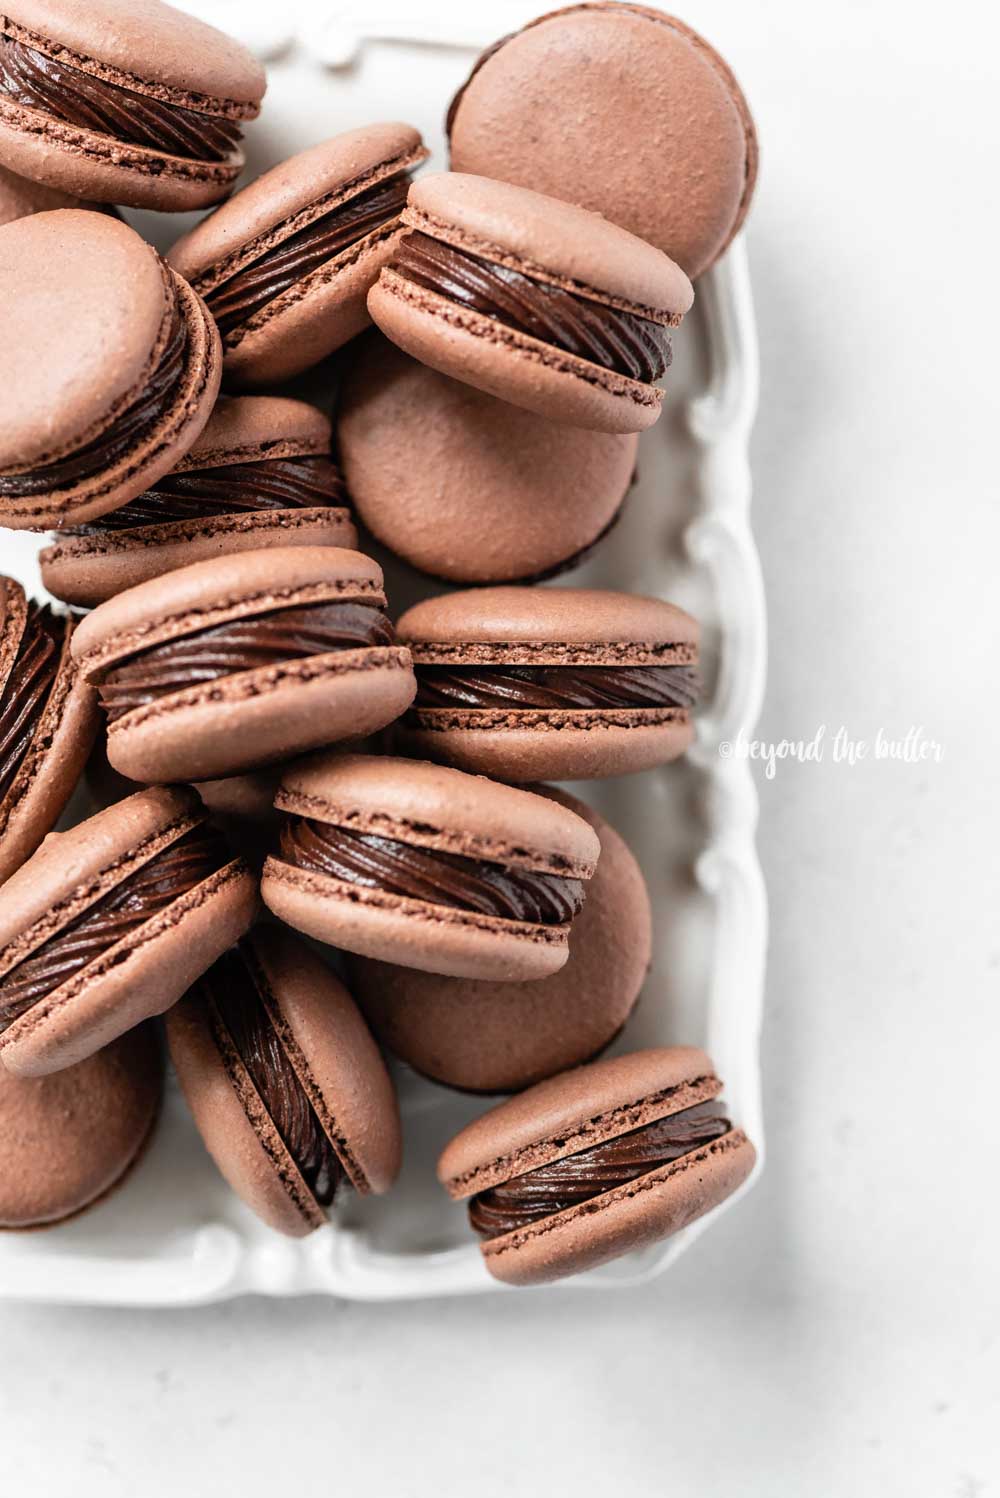 Overhead image of rectangular white plate full of chocolate macarons | All Images © Beyond the Butter™